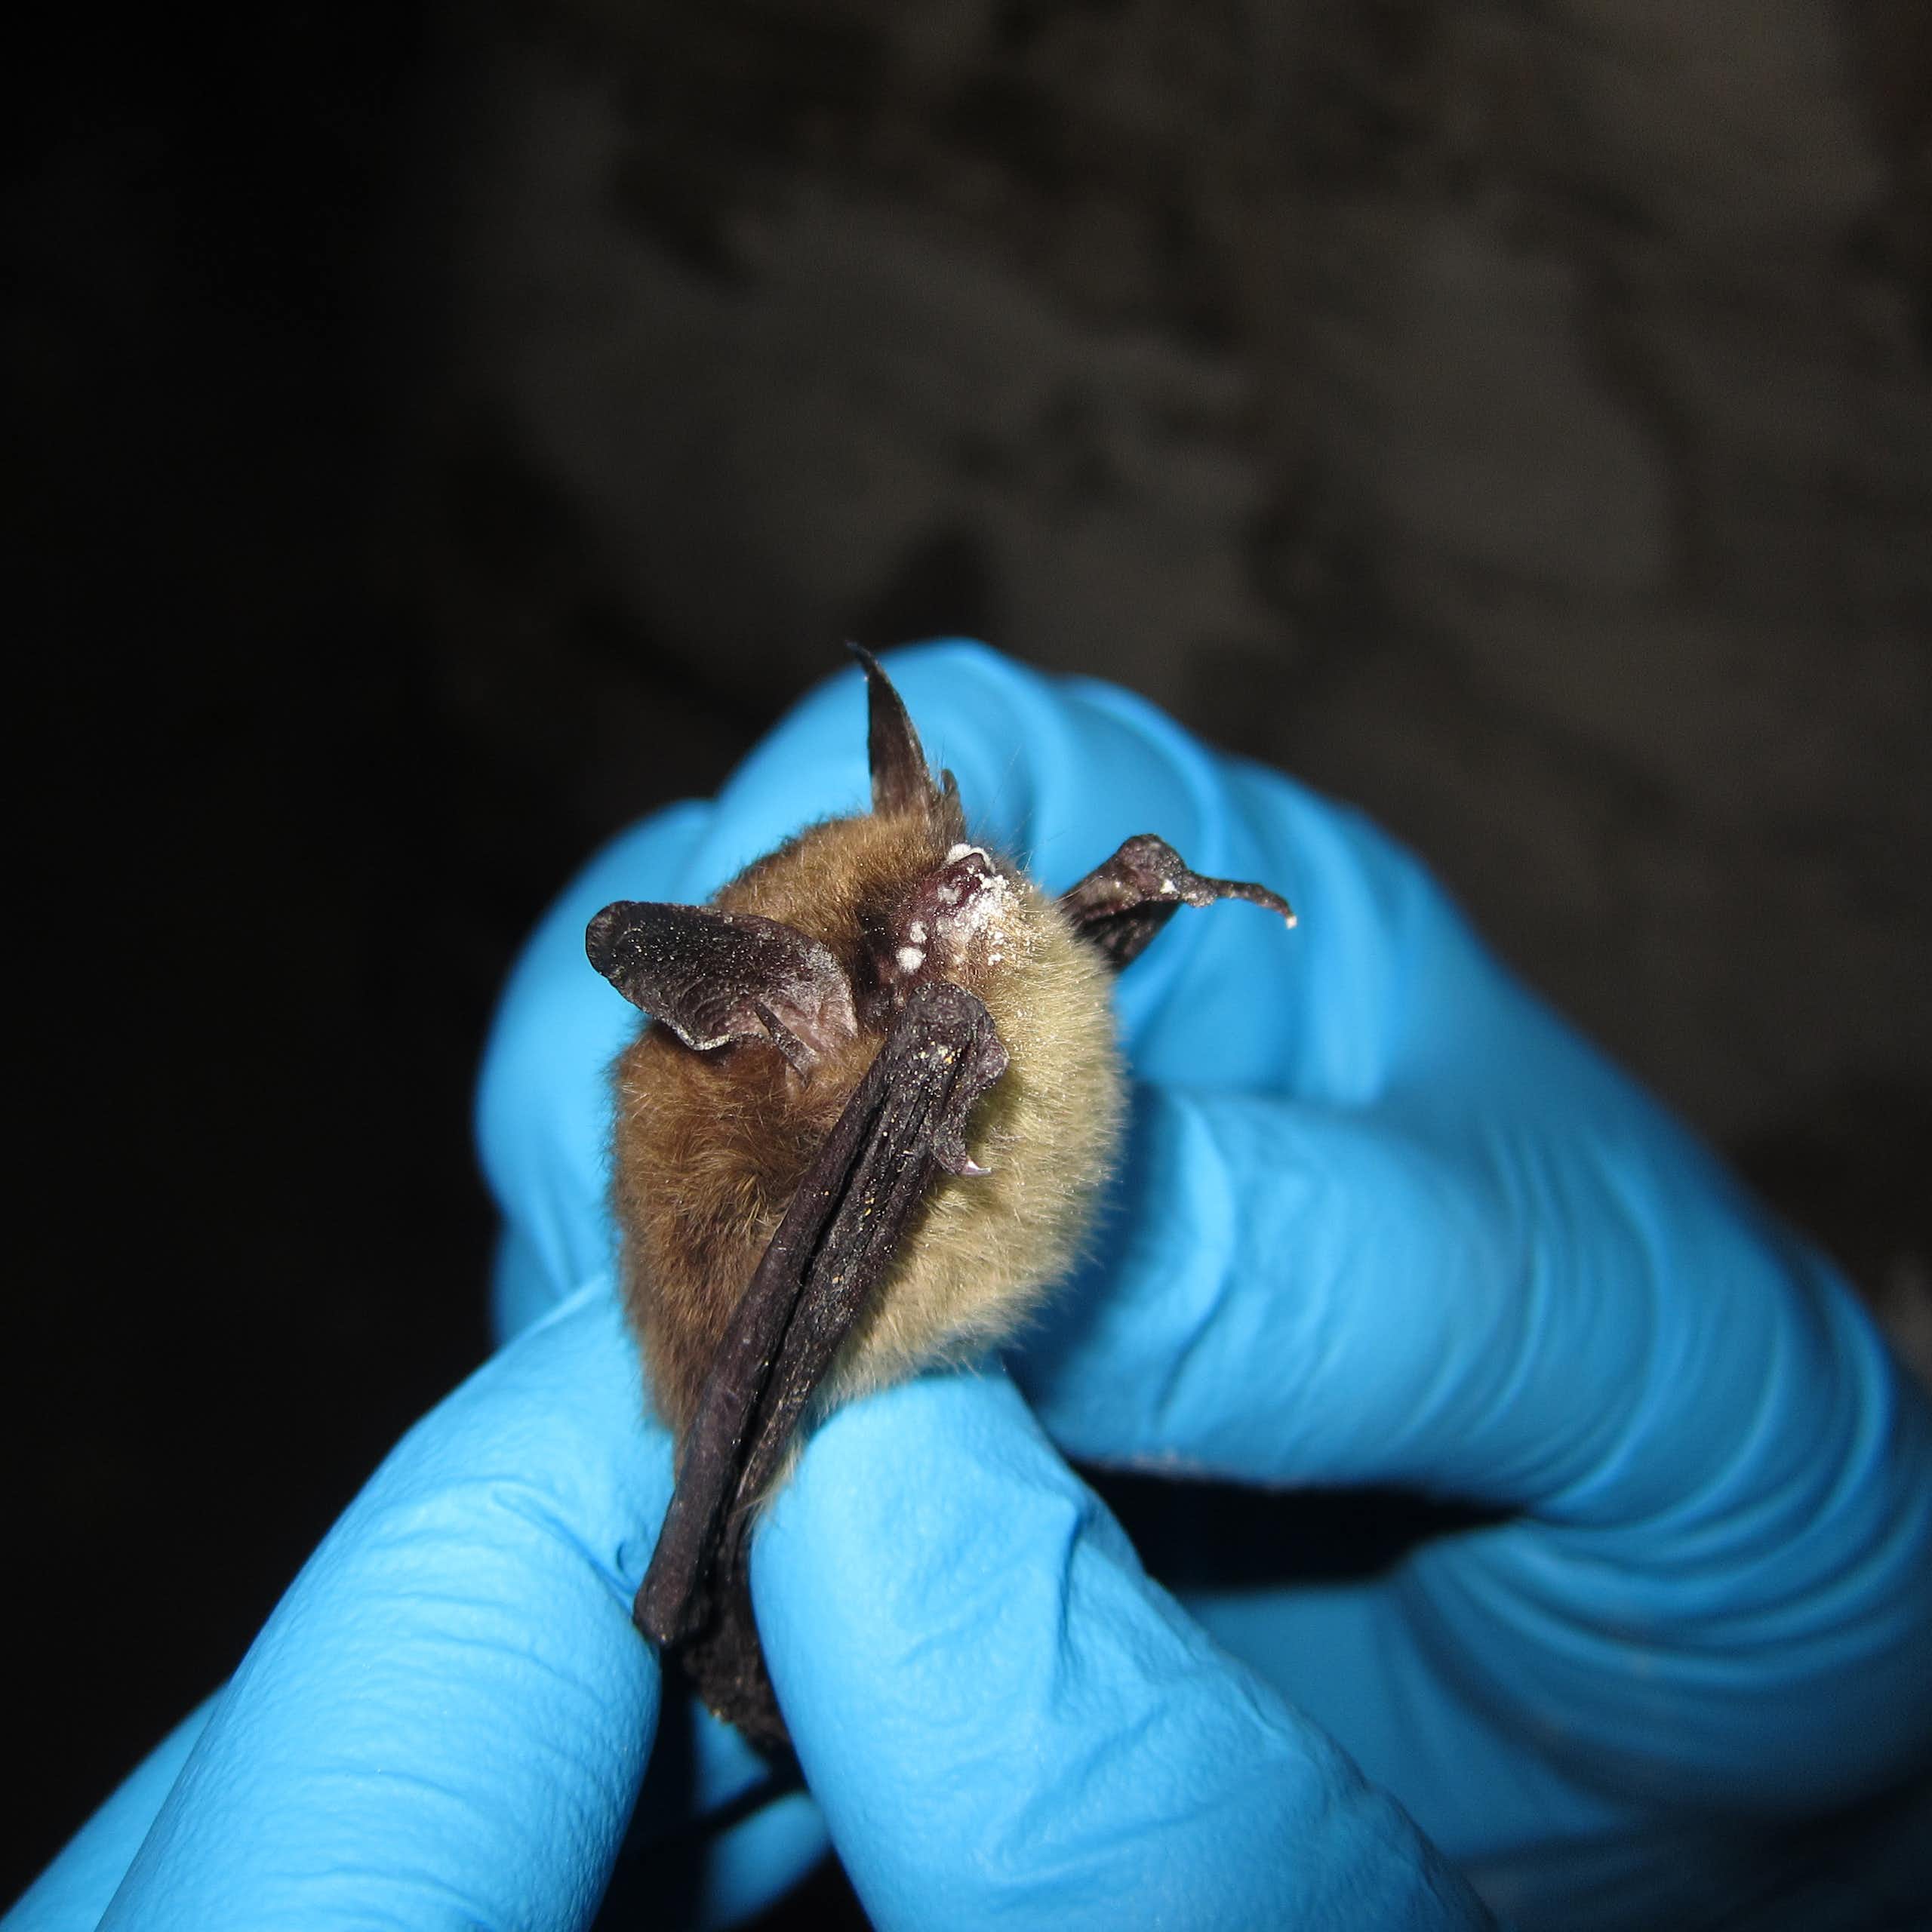 Hands wearing blue latex gloves hold a small bat that has a nose covered in white dusty-looking fungus